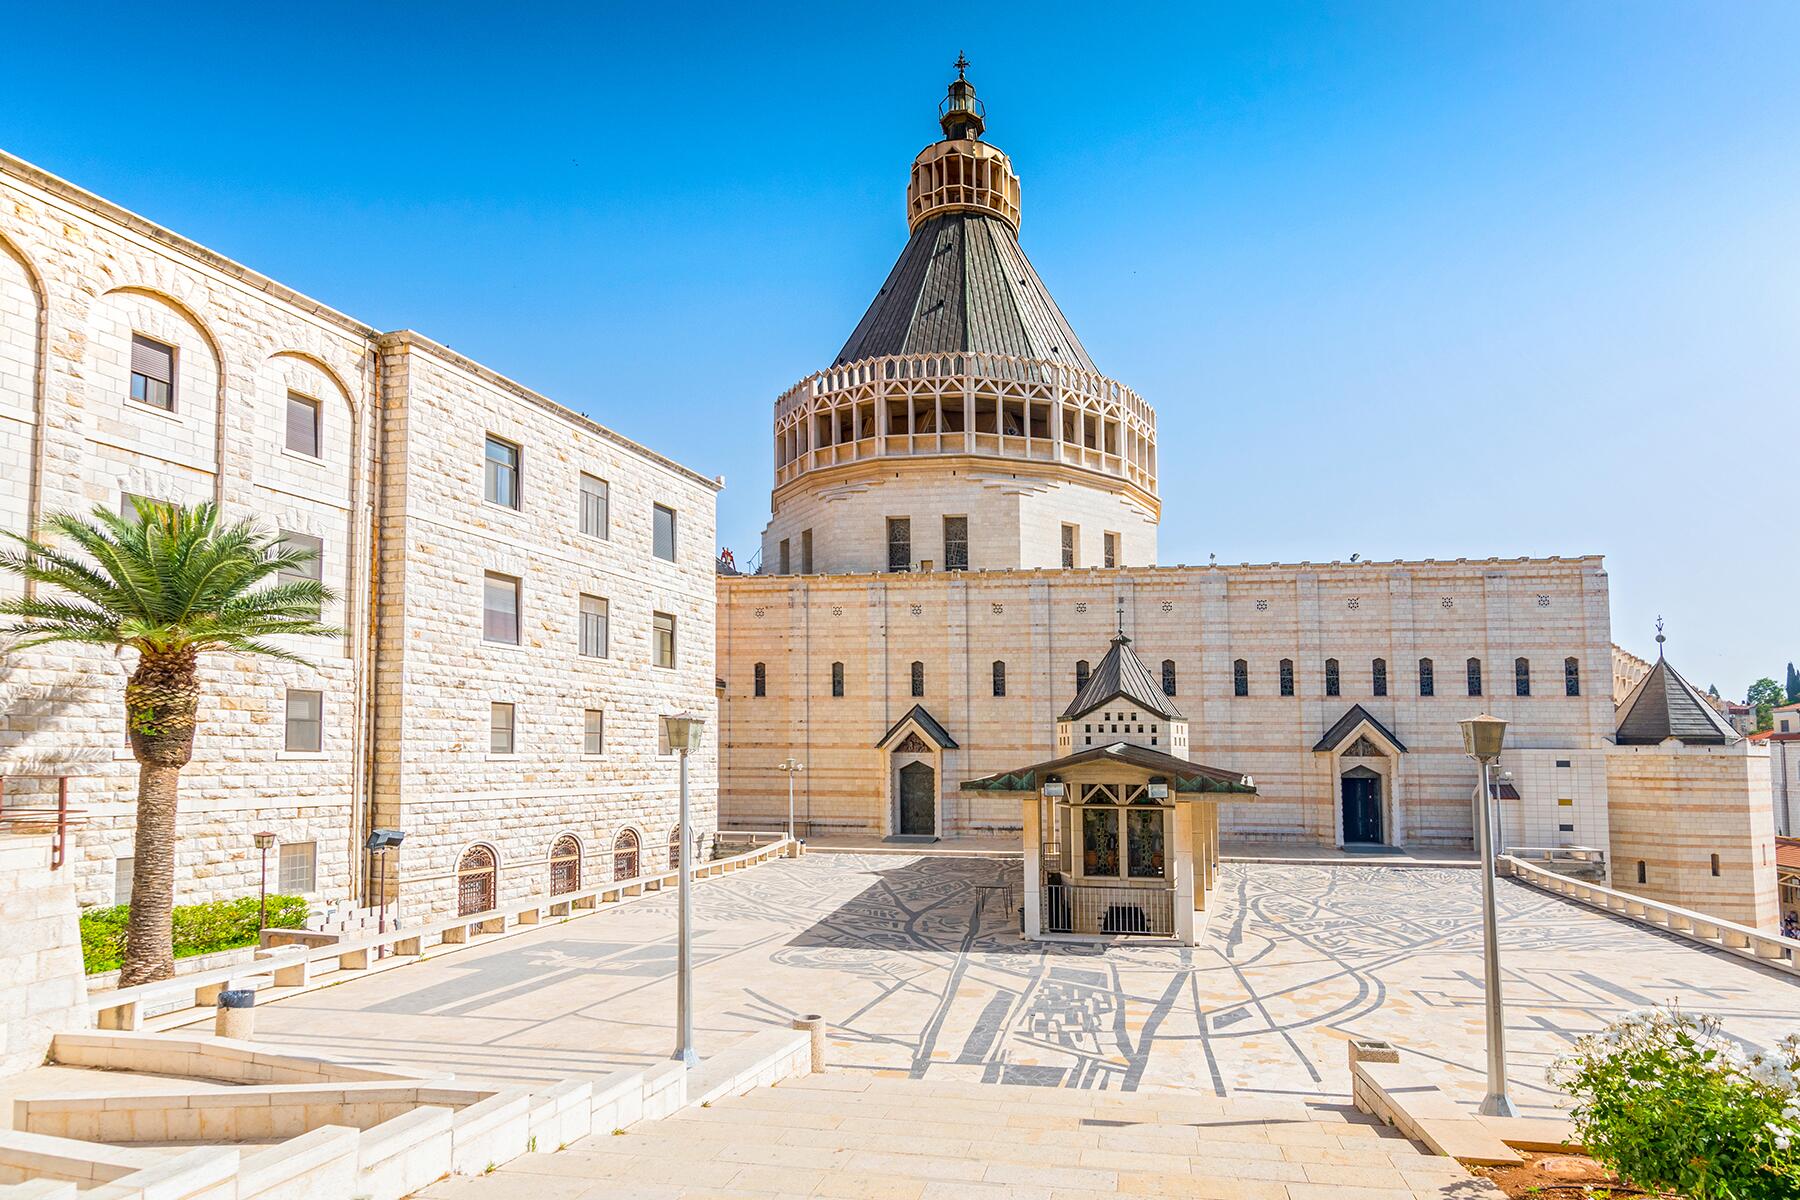 The 12 Must-See Historic Sites in Israel